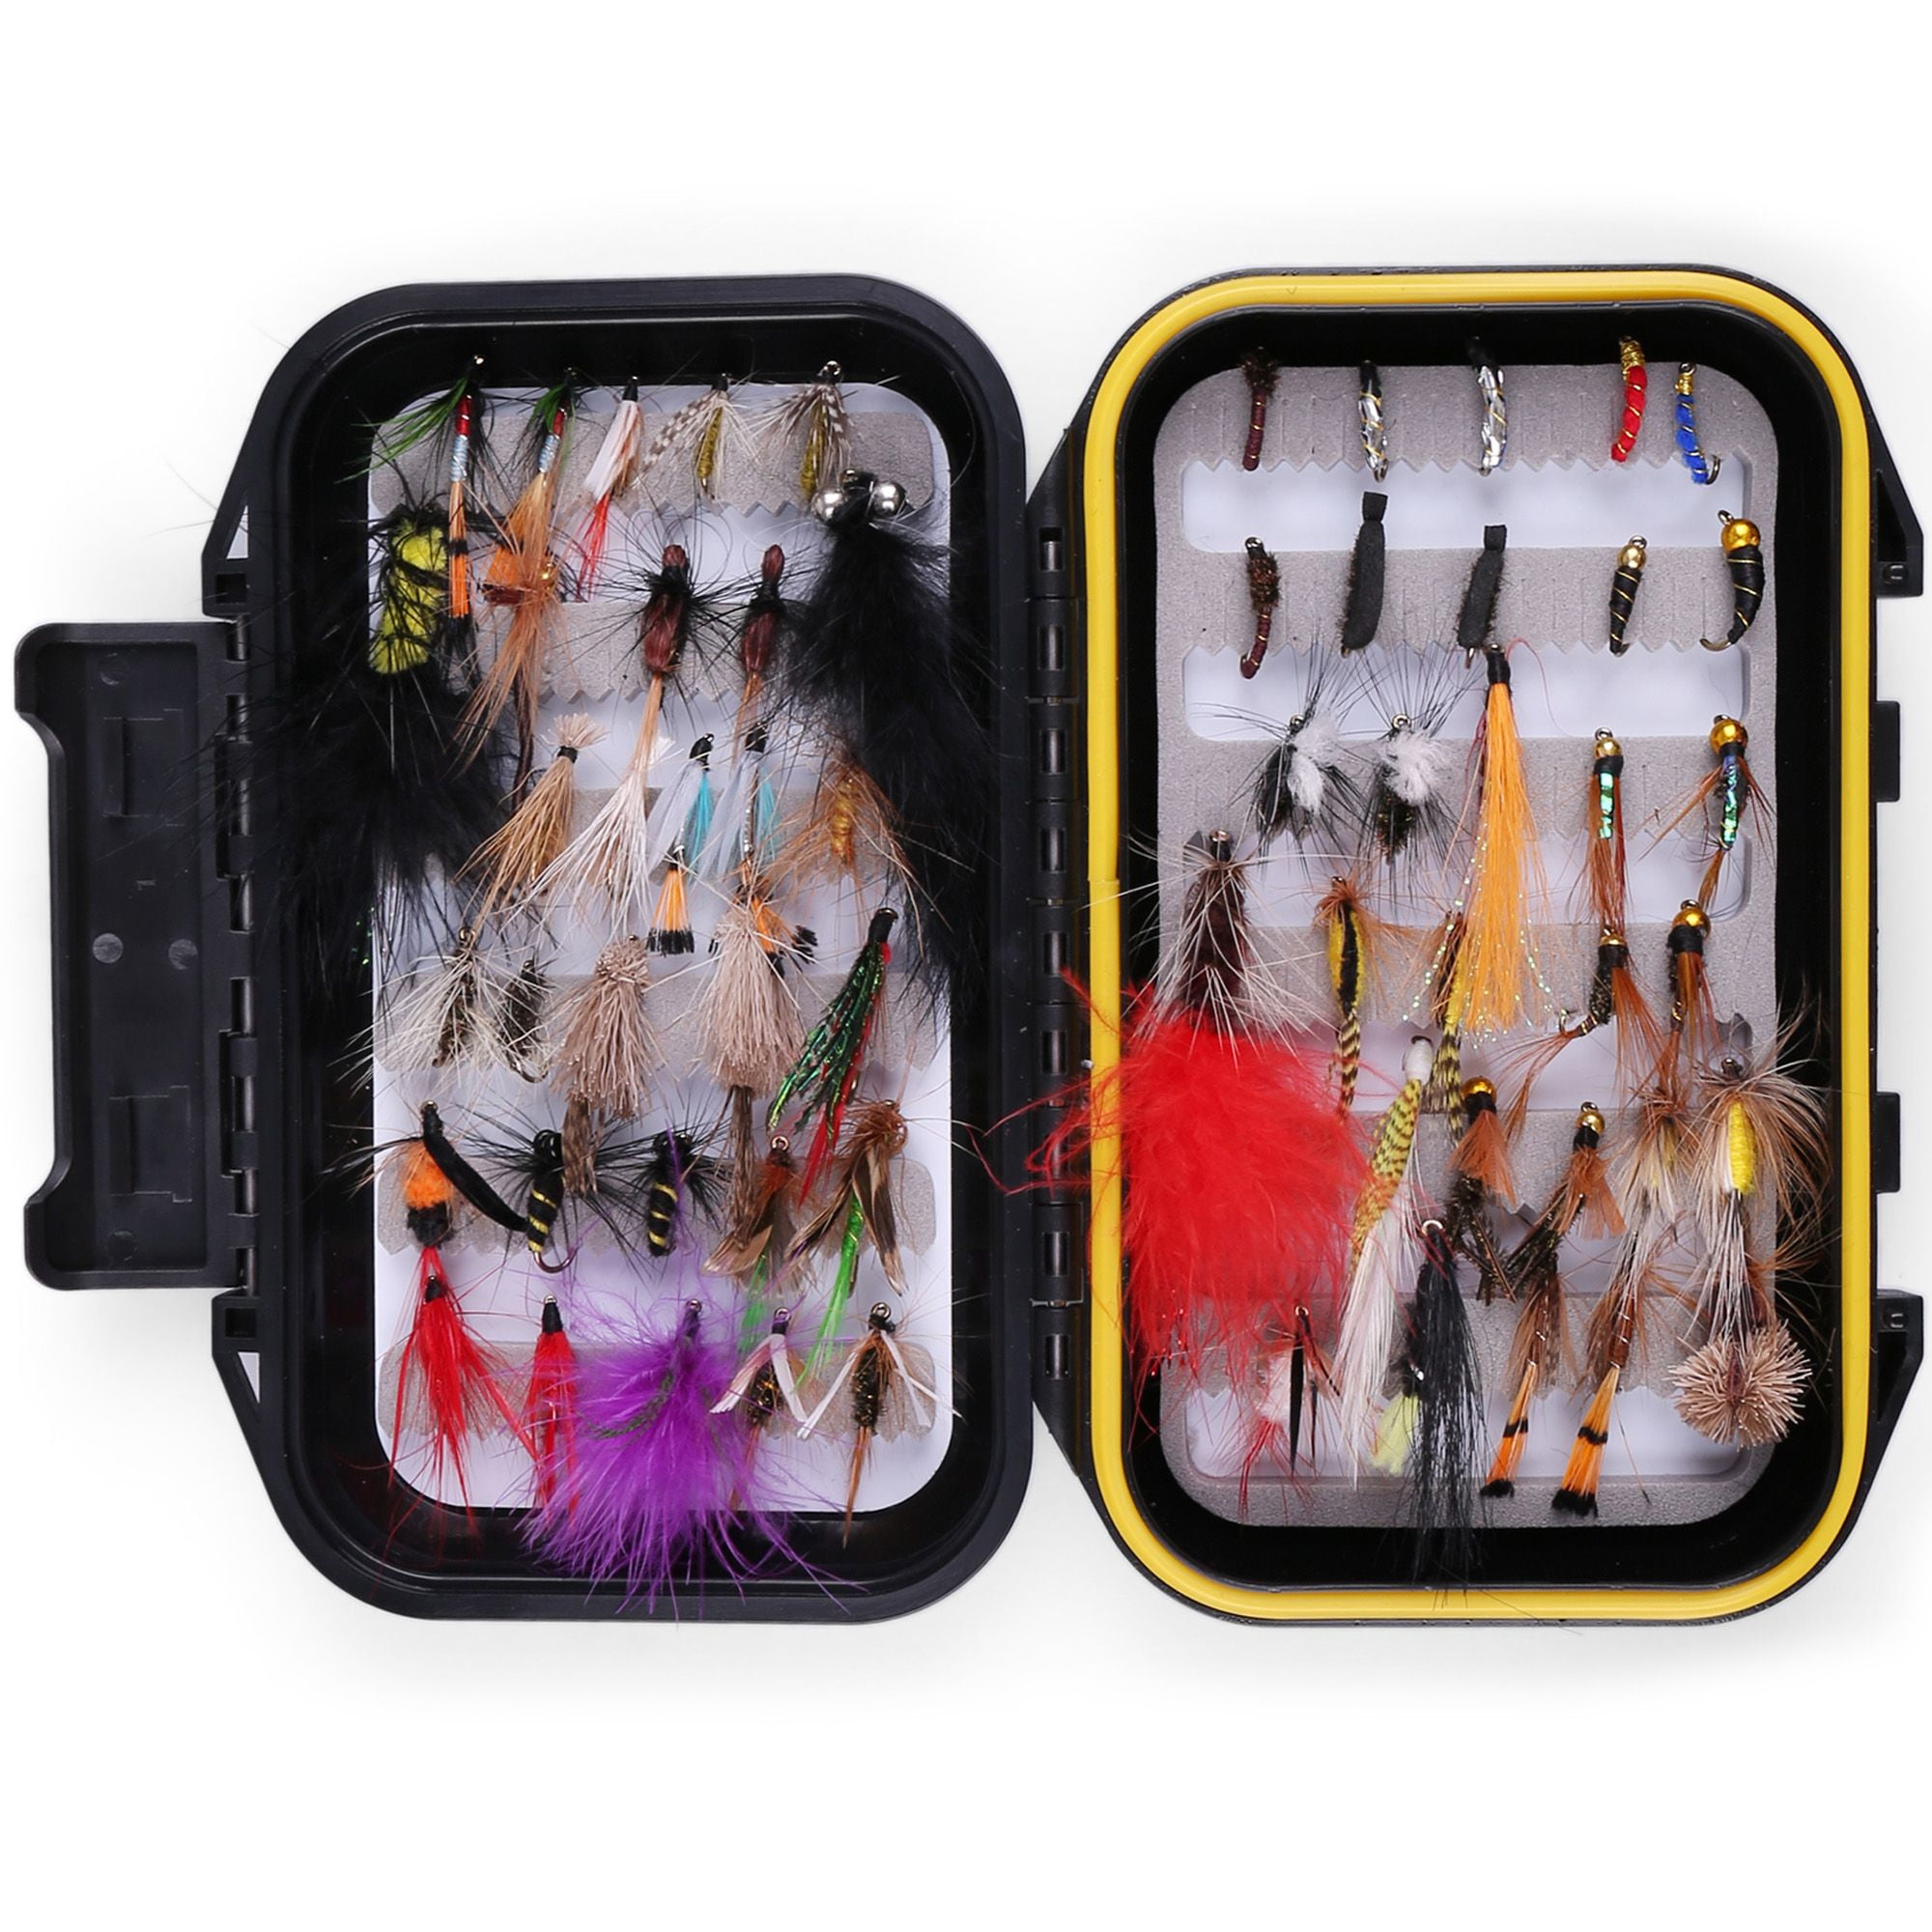 ASSORTMENT OF FISHING FLIES 12 PCS nymph dry wet lures trout salmon tackle hook 